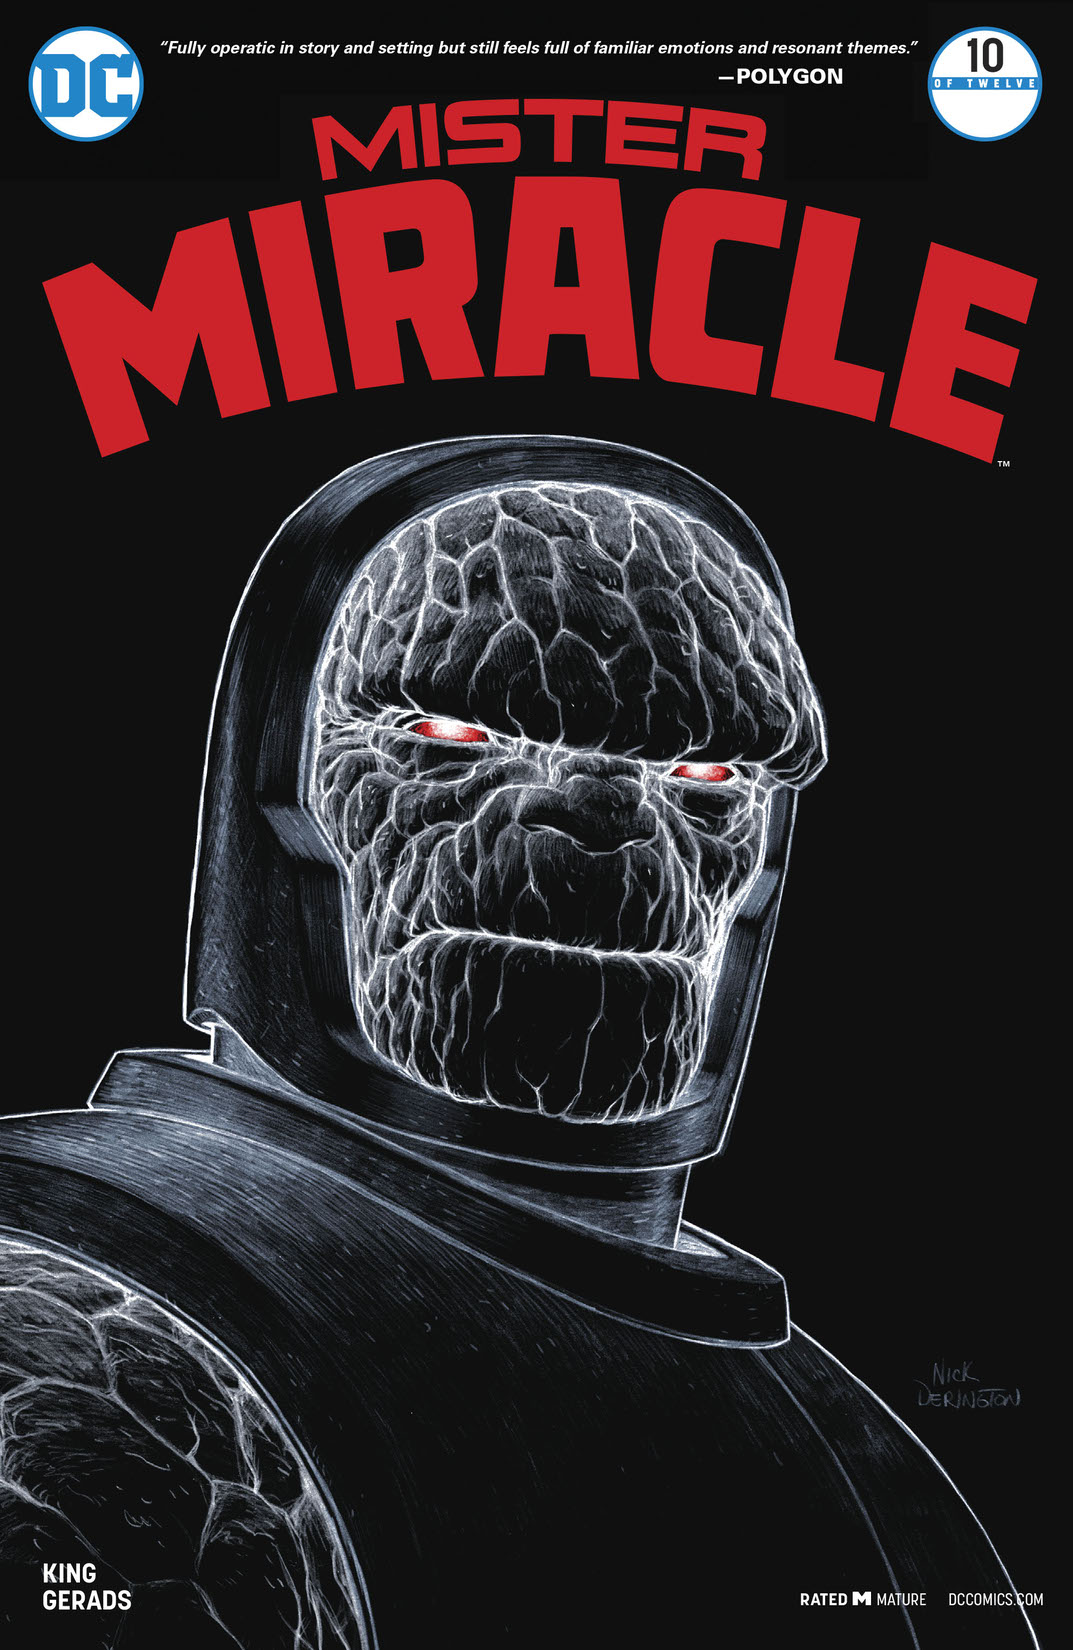 Mister Miracle (2017-) #10 preview images